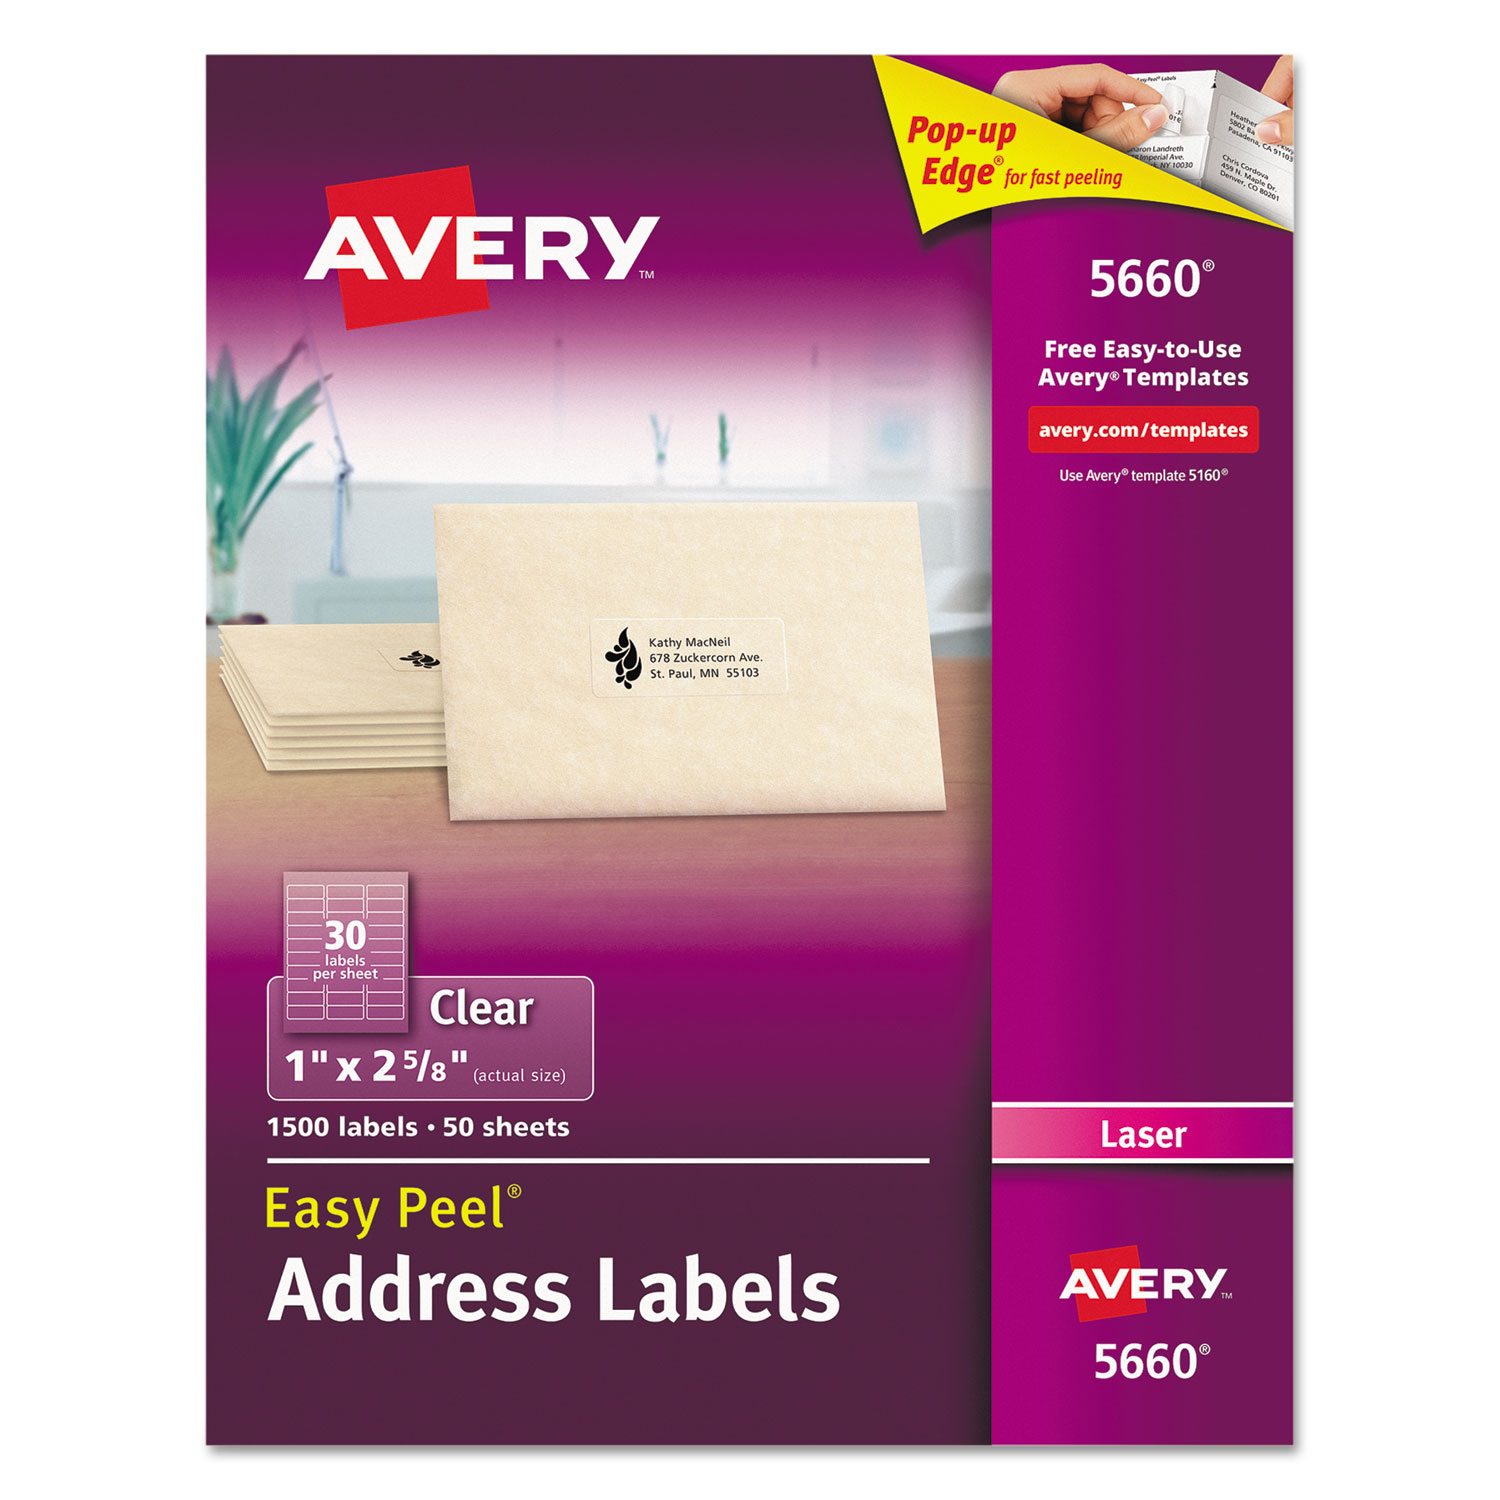 Case Pack of 5 Box of 1,500 5660 Avery Clear Easy Peel Address Labels for Laser Printers 1 x 2-5/8